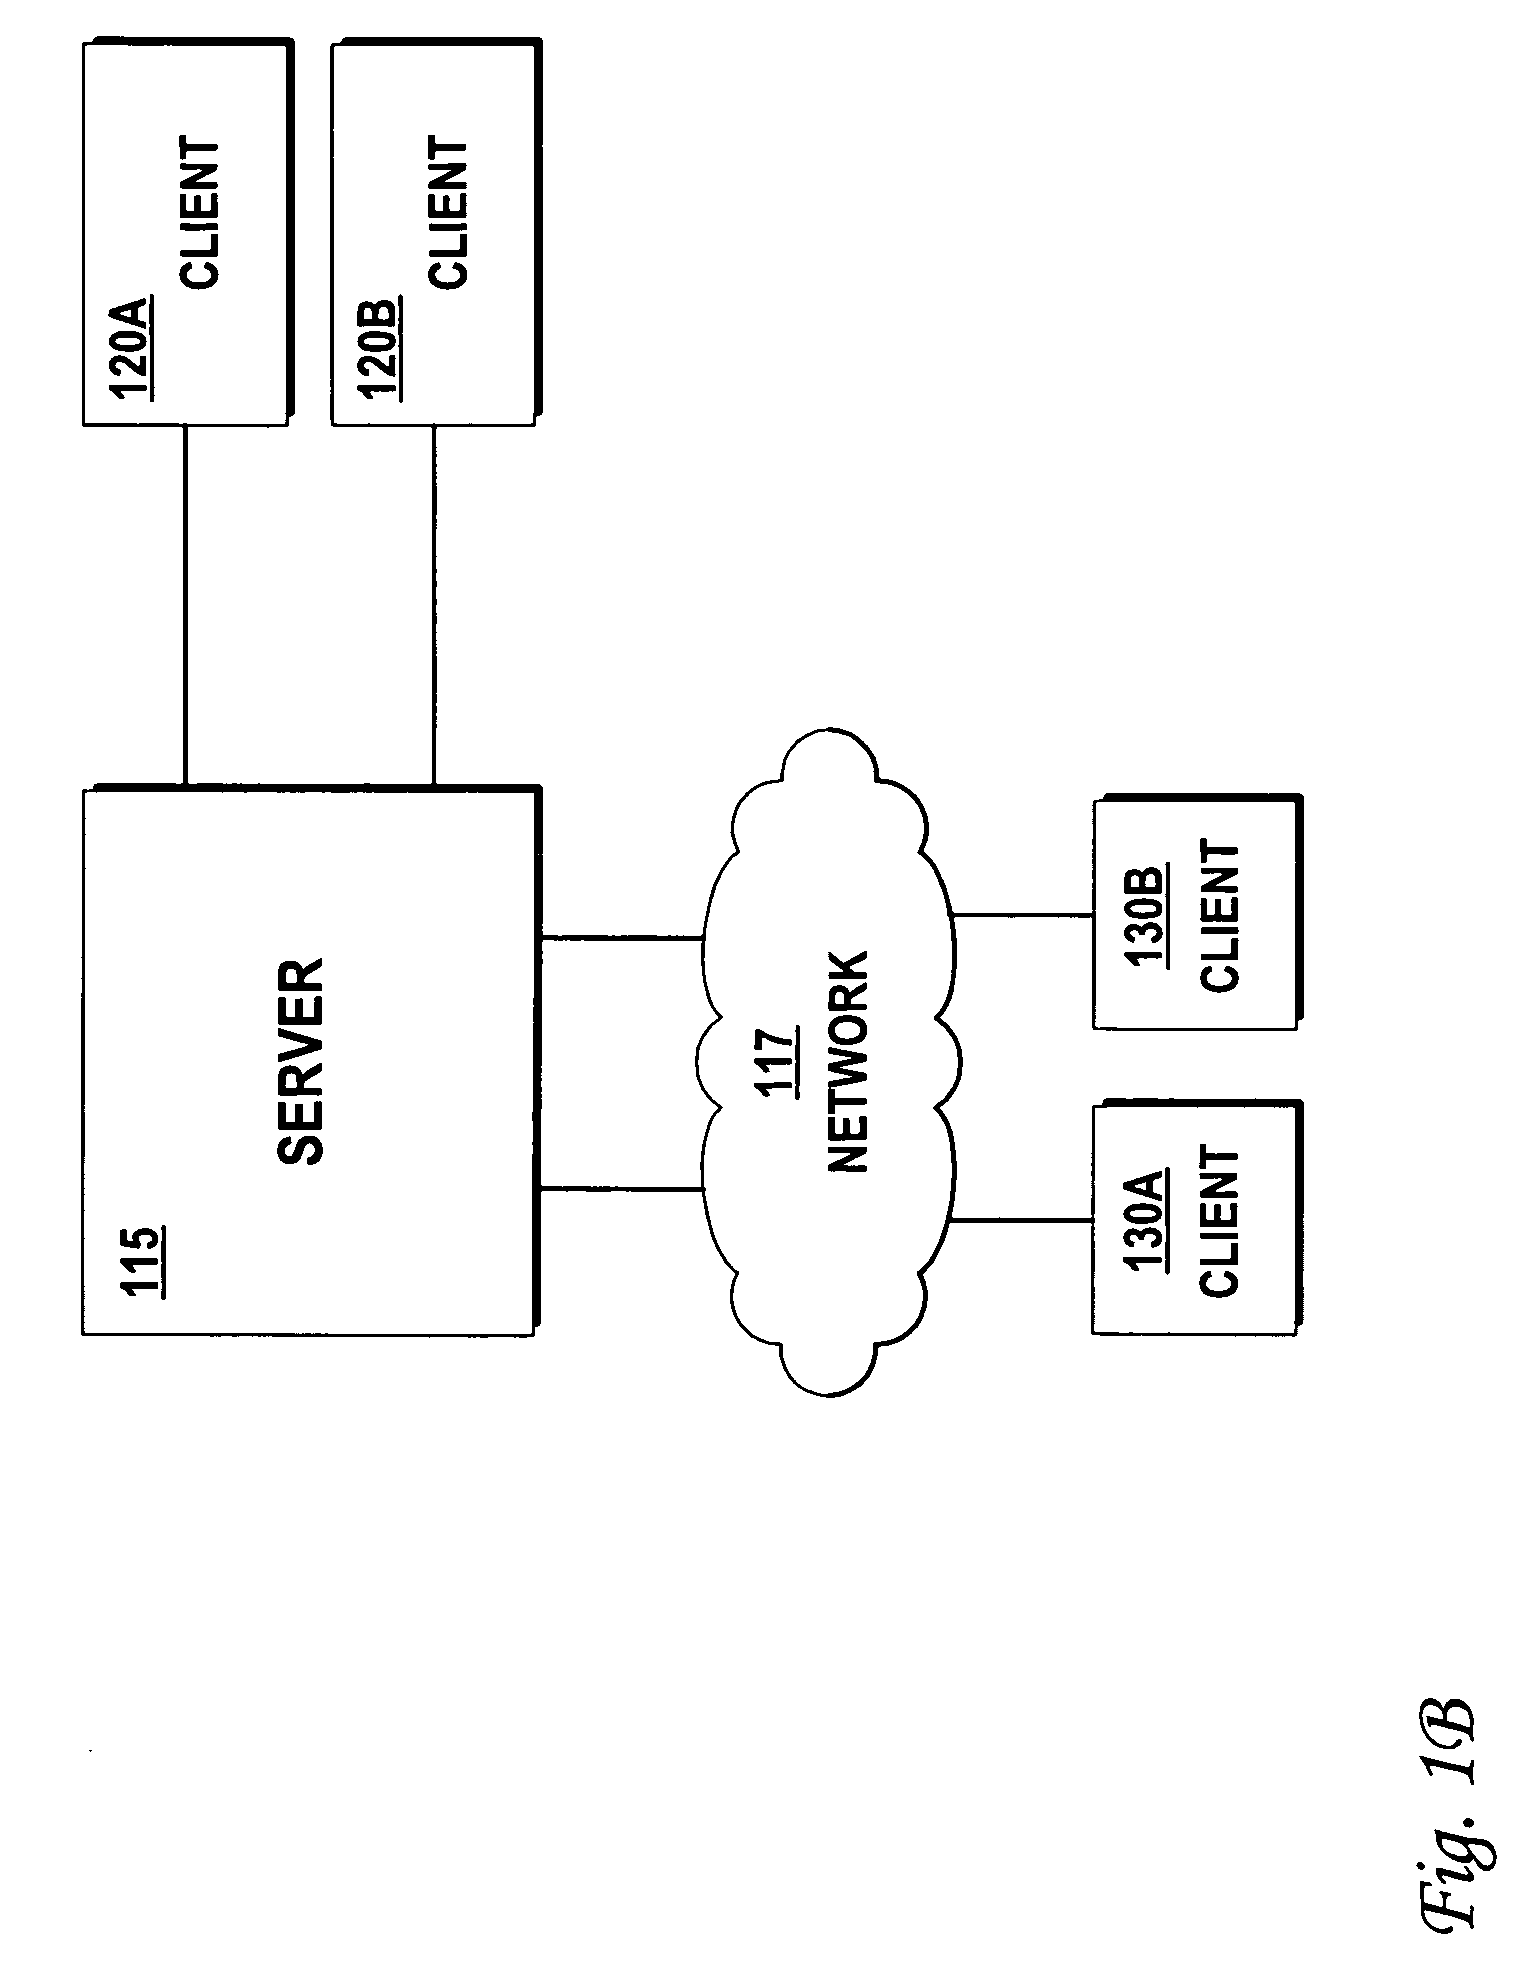 Generic product configuration framework for building product specific installers